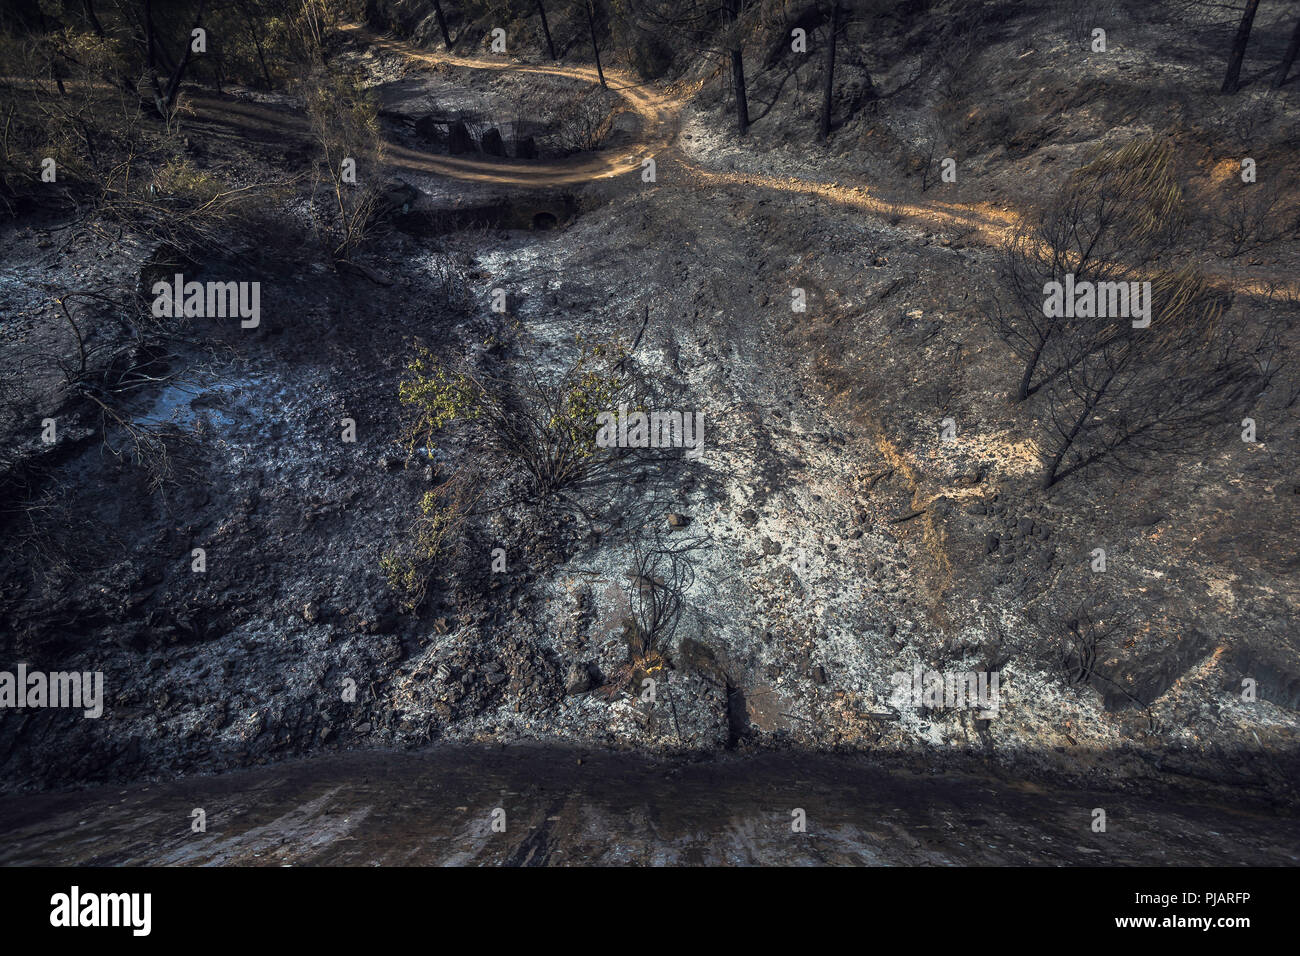 Aerial image of fire in a pine forest, with ashes in the ground and dirt roads Stock Photo